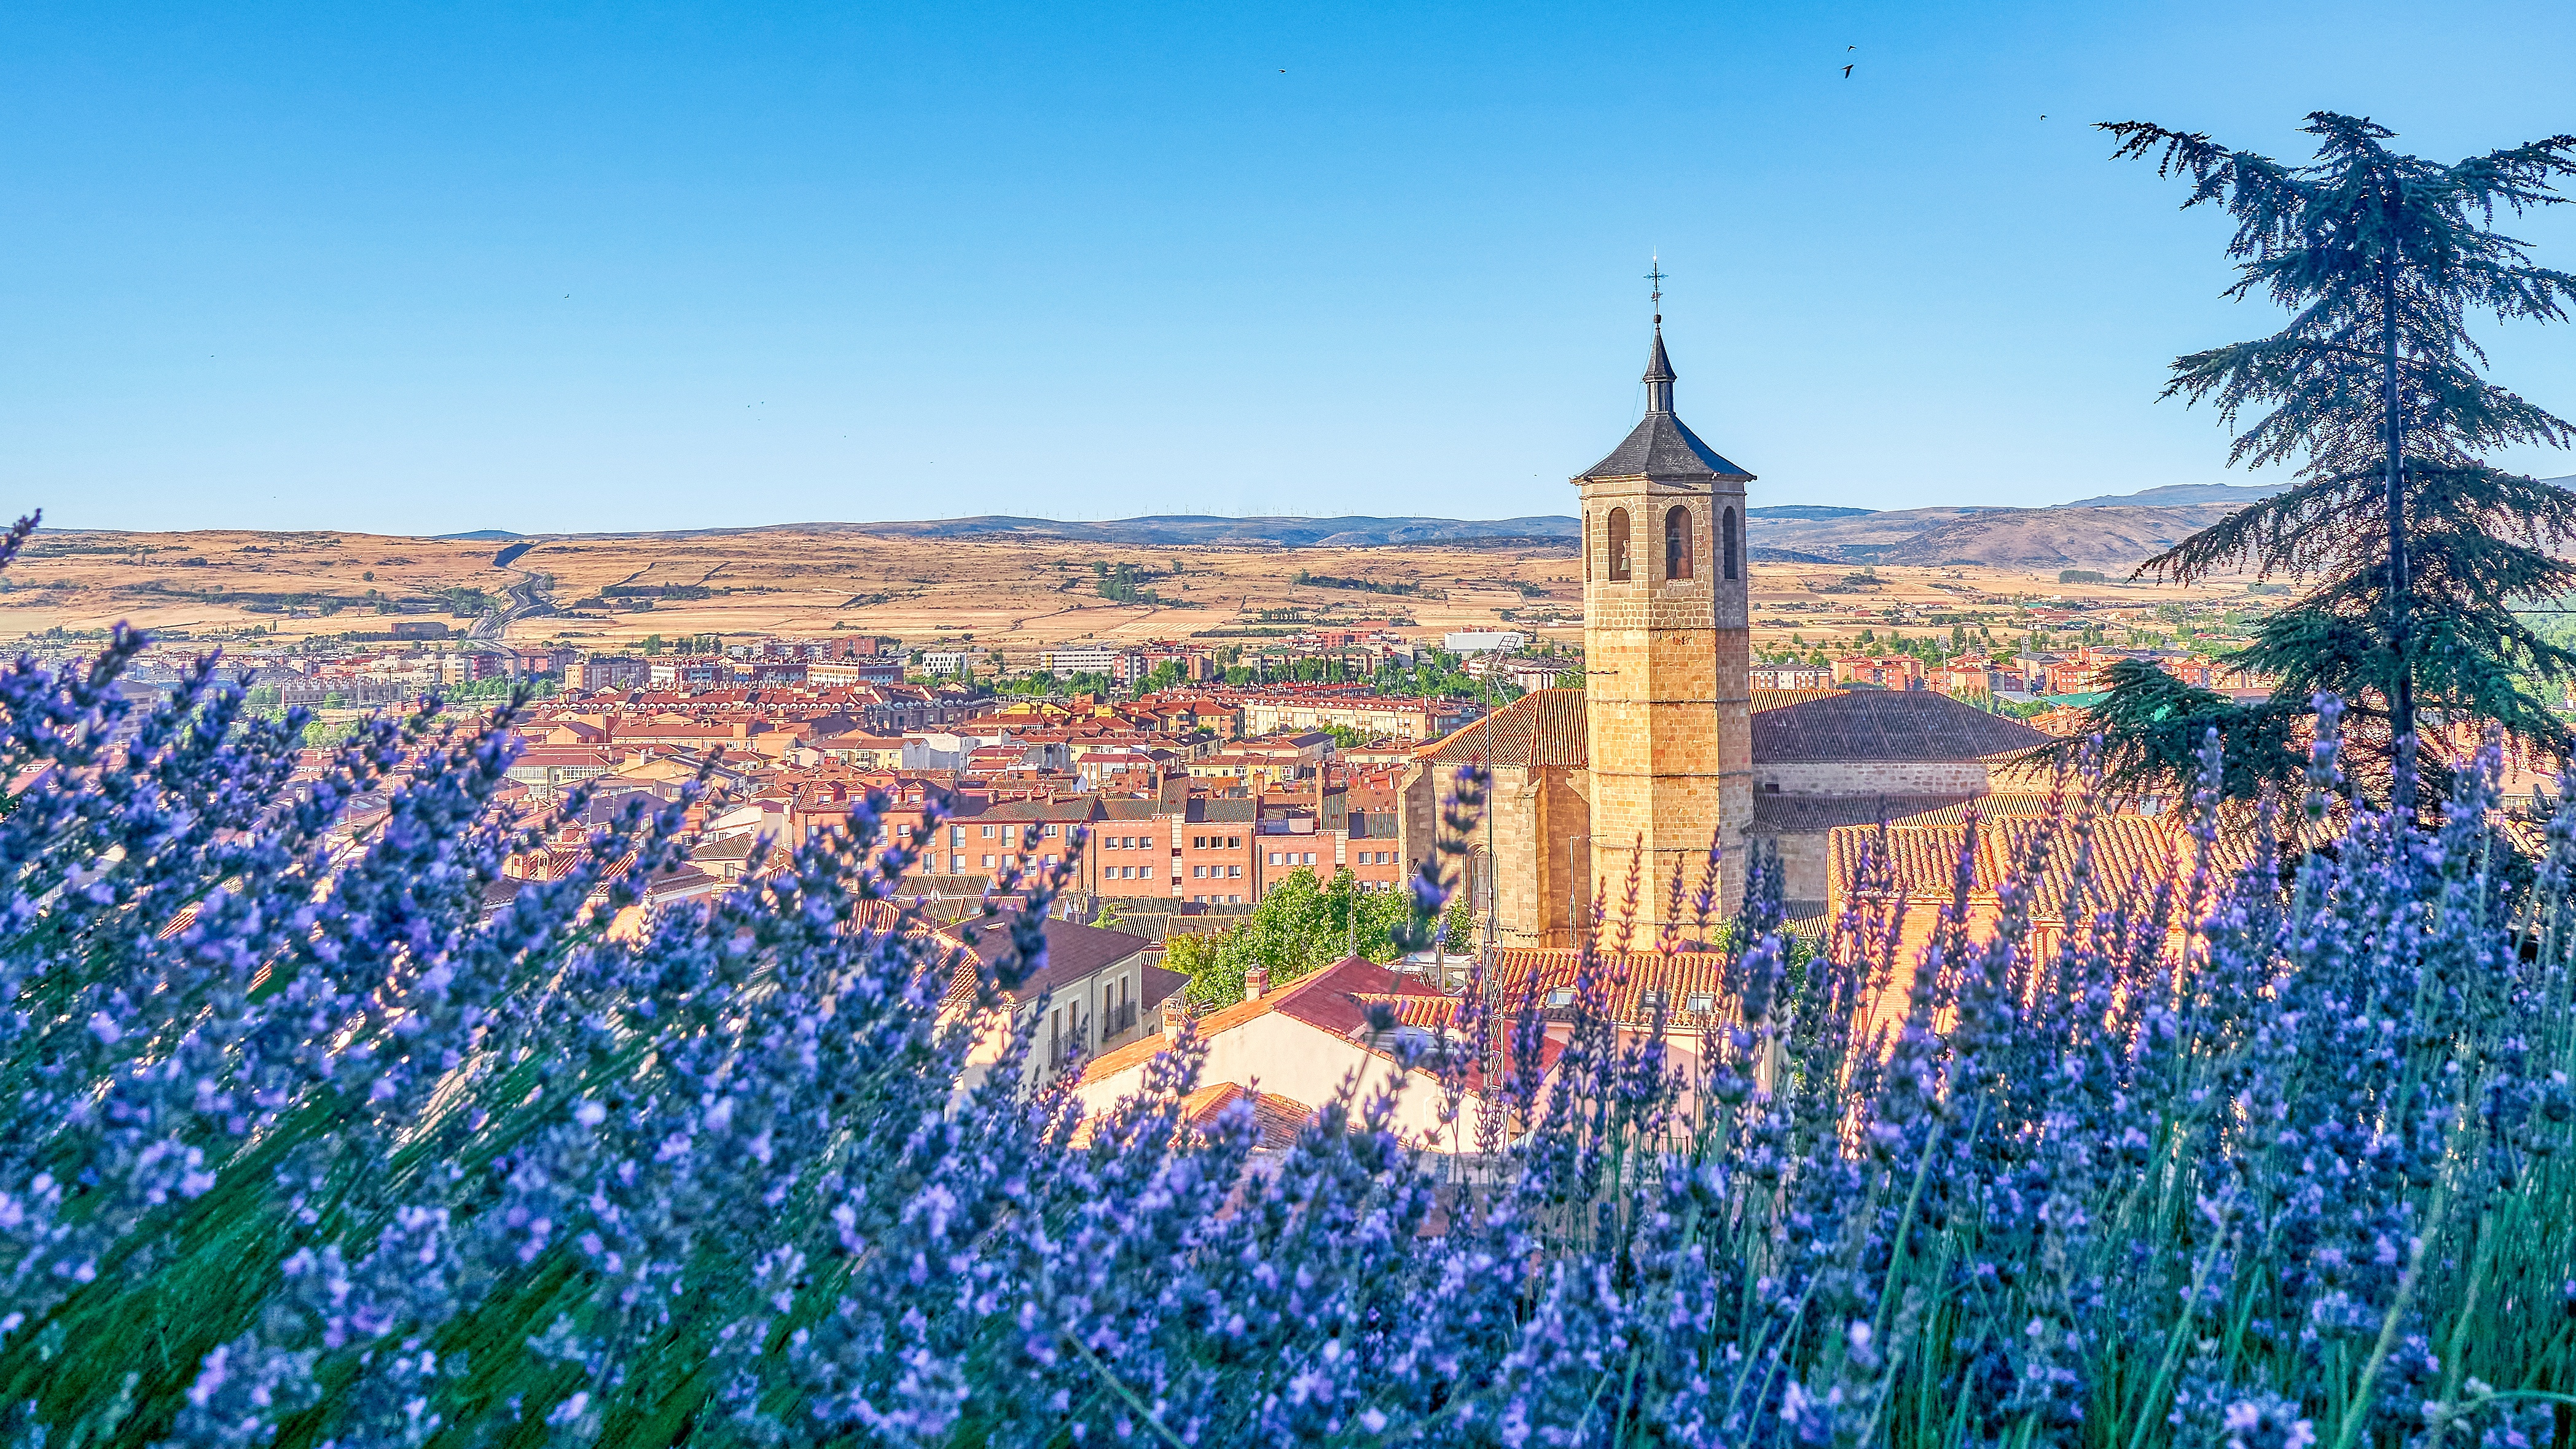 Mobile wallpaper religious, church, bell tower, building, flower, house, lavender, panorama, spain, tower, churches